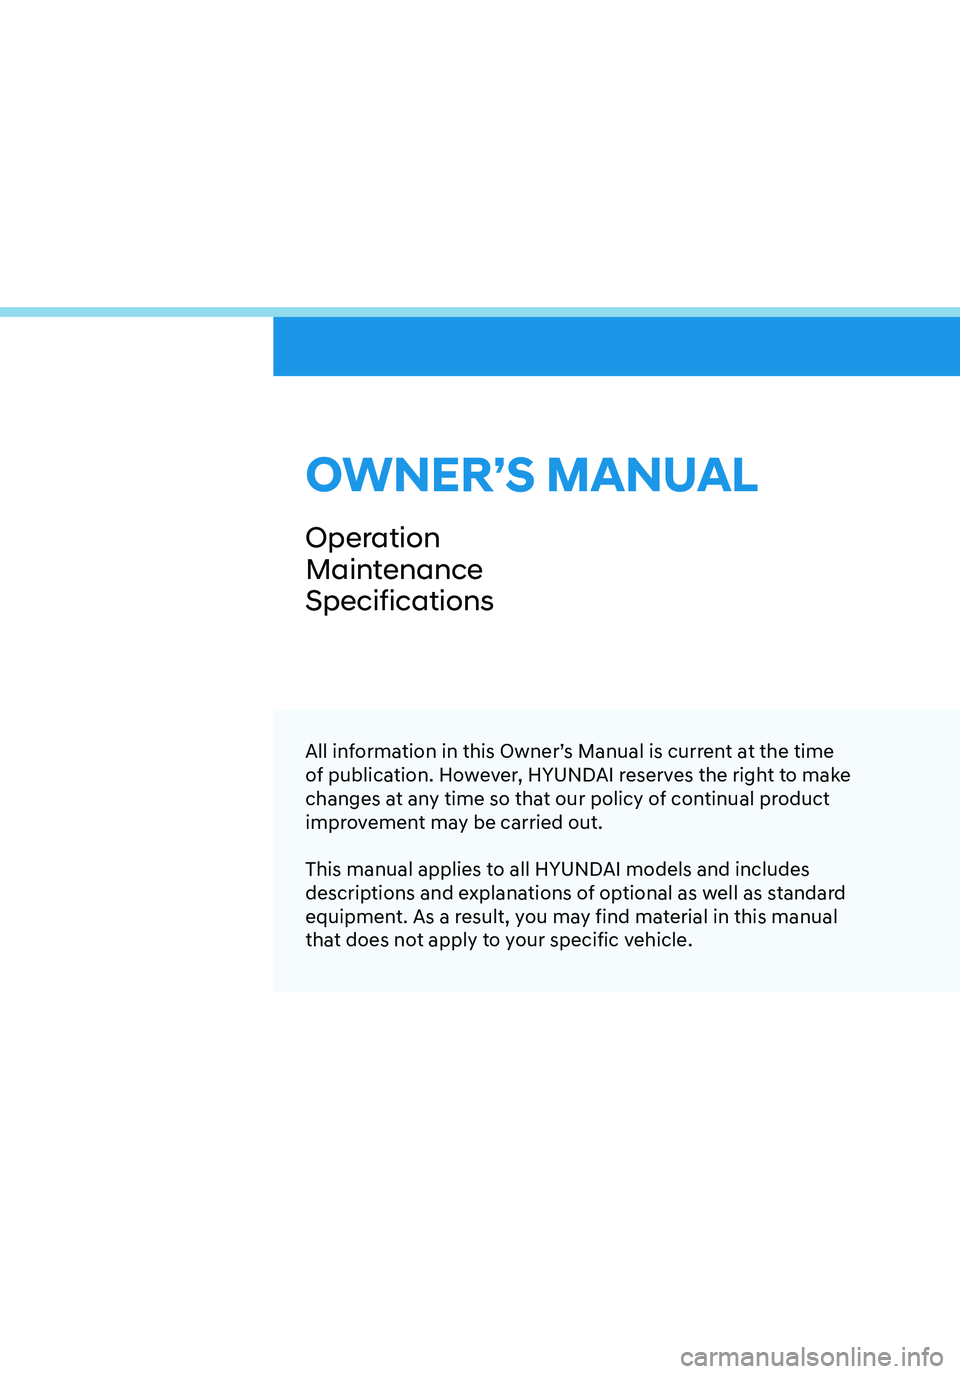 HYUNDAI ELANTRA HYBRID 2021  Owners Manual OWNER’S MANUAL
Operation
Maintenance
Specifications
All information in this Owner’s Manual is current at the time 
of publication. However, HYUNDAI reserves the right to make 
changes at any time 